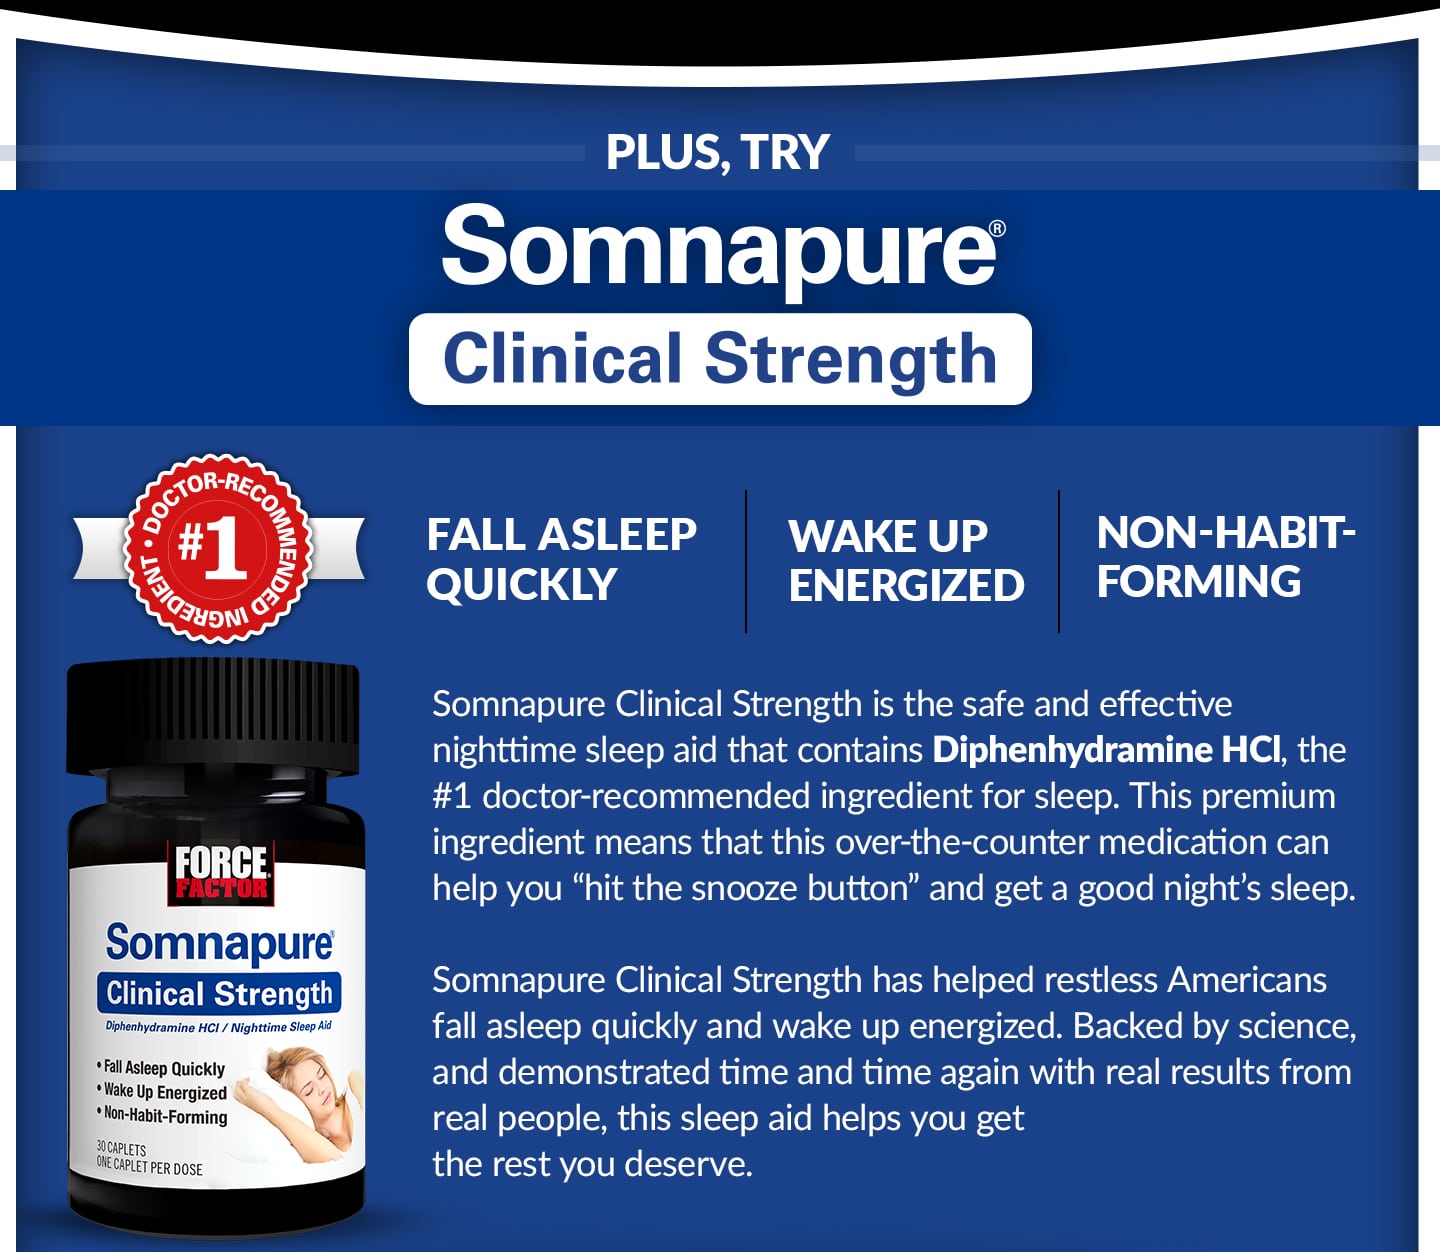 PLUS, TRY SOMNAPURE CLINICAL STRENGTH, WITH THE #1 DOCTOR-RECOMMENDED INGREDIENT FOR SLEEP. Fall Asleep Quickly, Wake Up Energized, Non-Habit-Forming. Somnapure Clinical Strength is the safe and effective nighttime sleep aid that contains Diphenhydramine HCl, the #1 doctor-recommended ingredient for sleep. This premium ingredient means that this over-the-counter medication can help you “hit the snooze button” and get a good night’s sleep. Somnapure Clinical Strength has helped restless Americans fall asleep quickly and wake up energized. Backed by science, and demonstrated time and time again with real results from real people, this sleep aid helps you get the rest you deserve. 